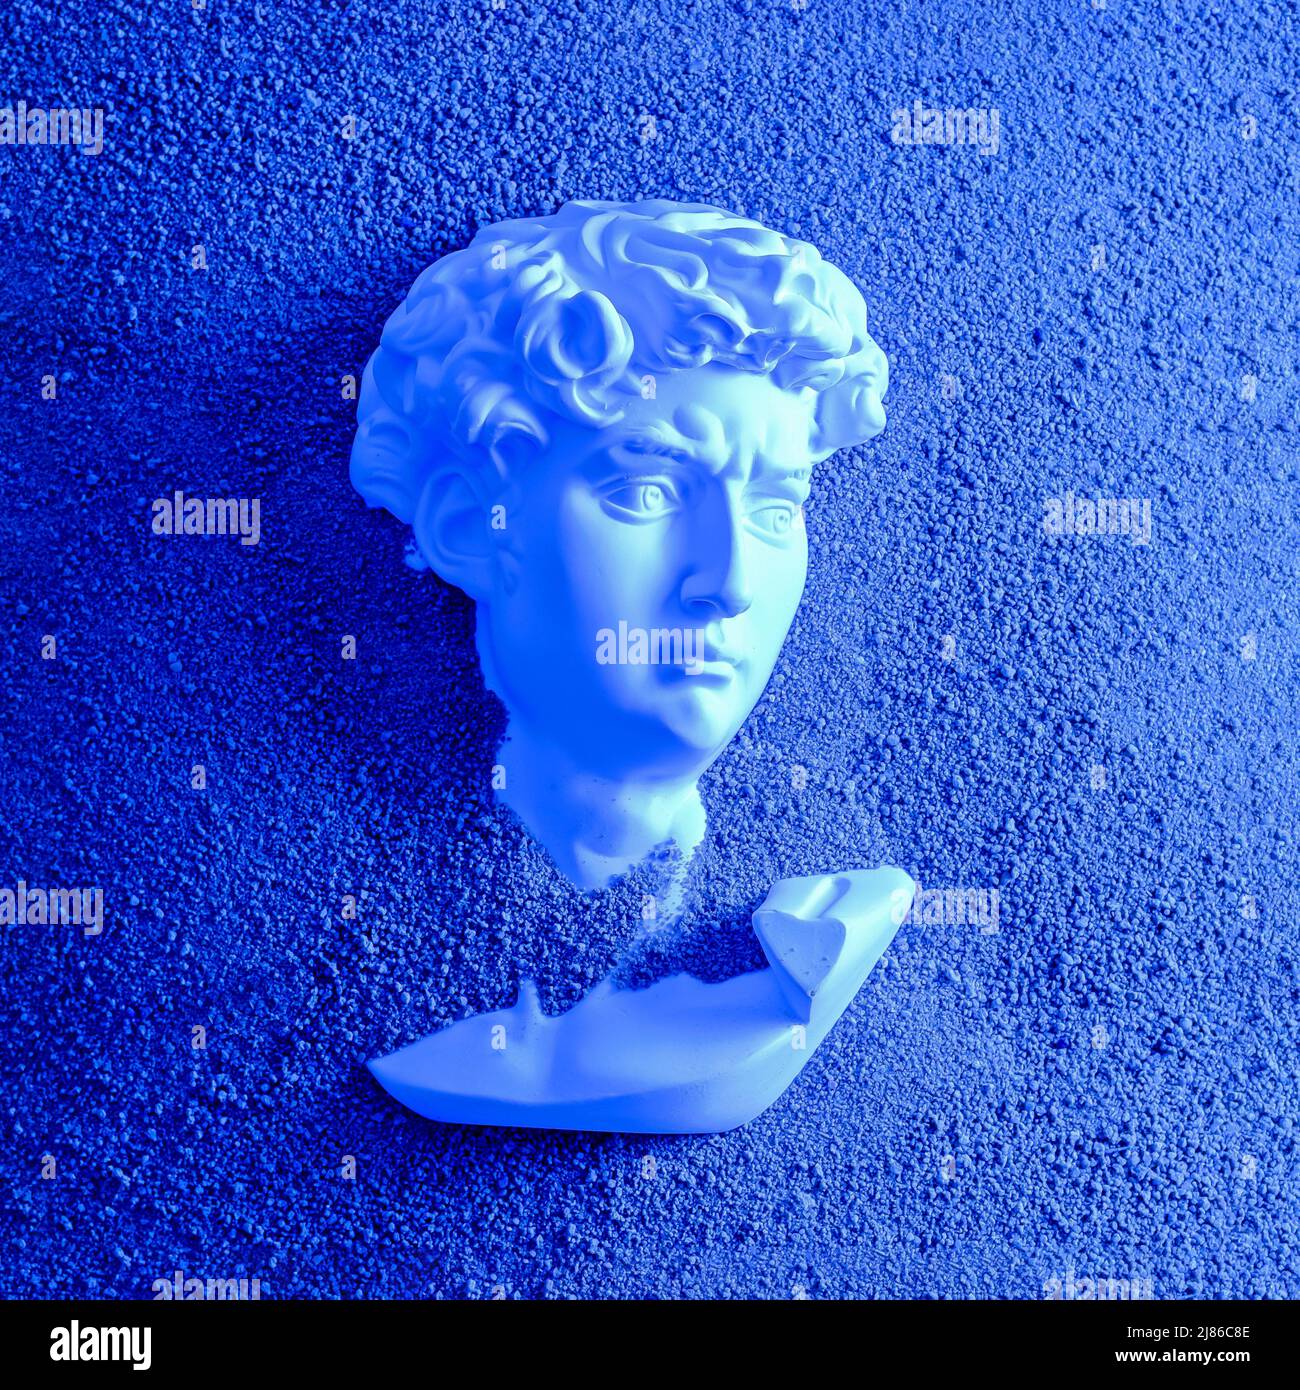 Bust head of David plaster antique in the sand on the beach. Minimal concept of futurism, cyberpunk and vaporway. Stock Photo